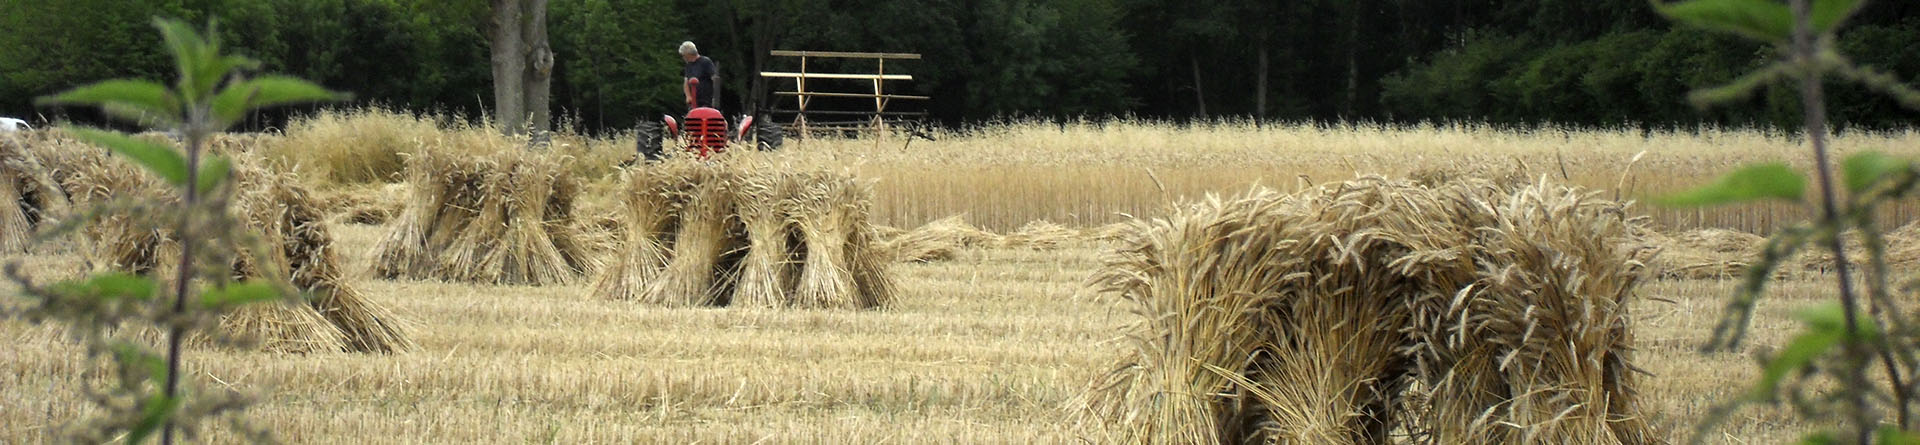 Photograph of a crop being harvested in Wiltshire